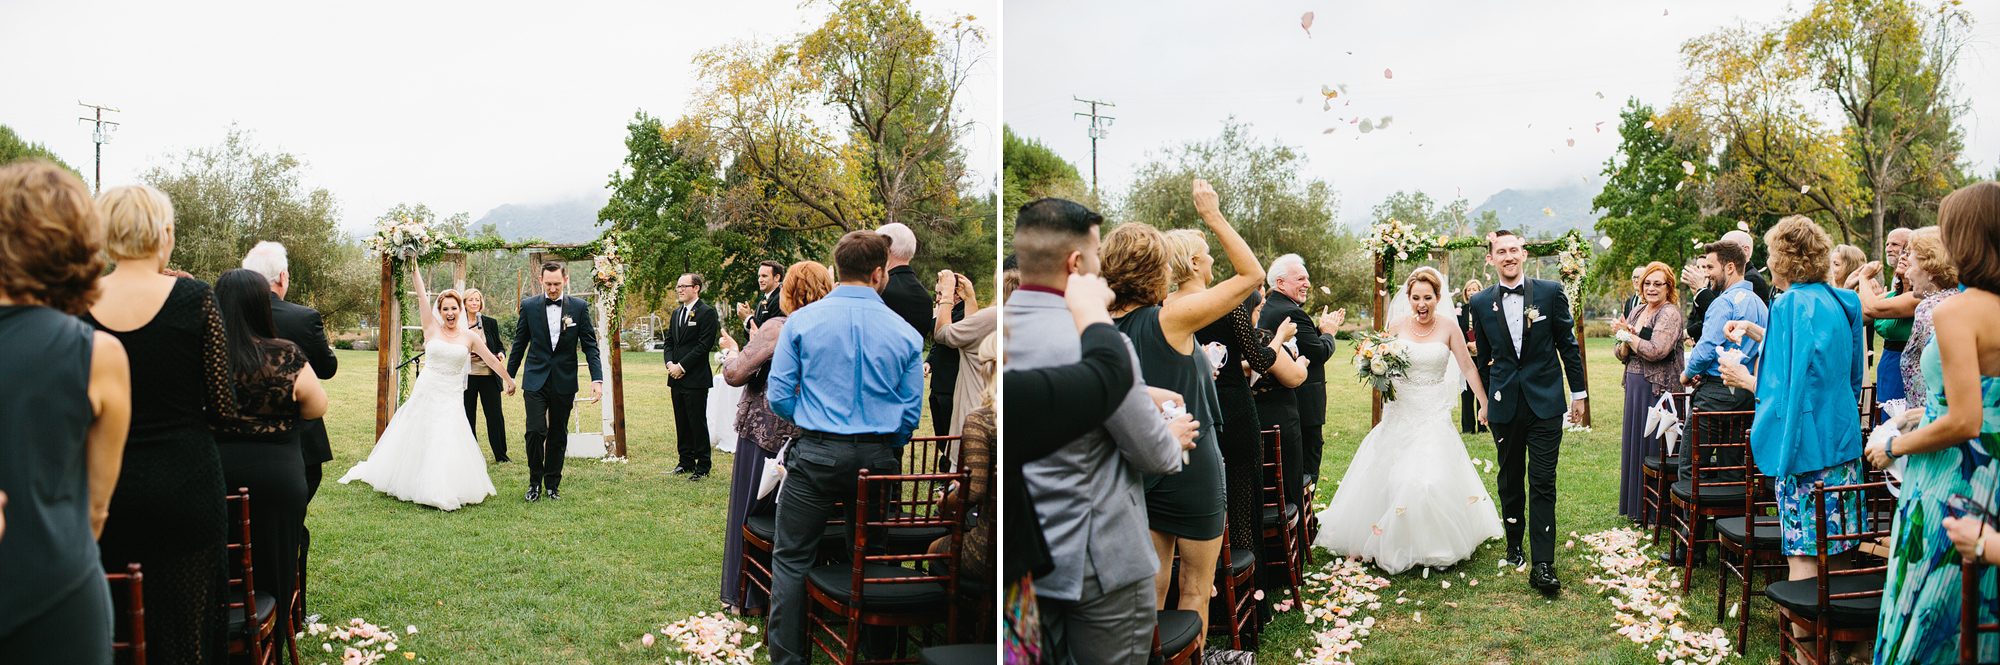 The bride and groom's recessional with petals tossed. 